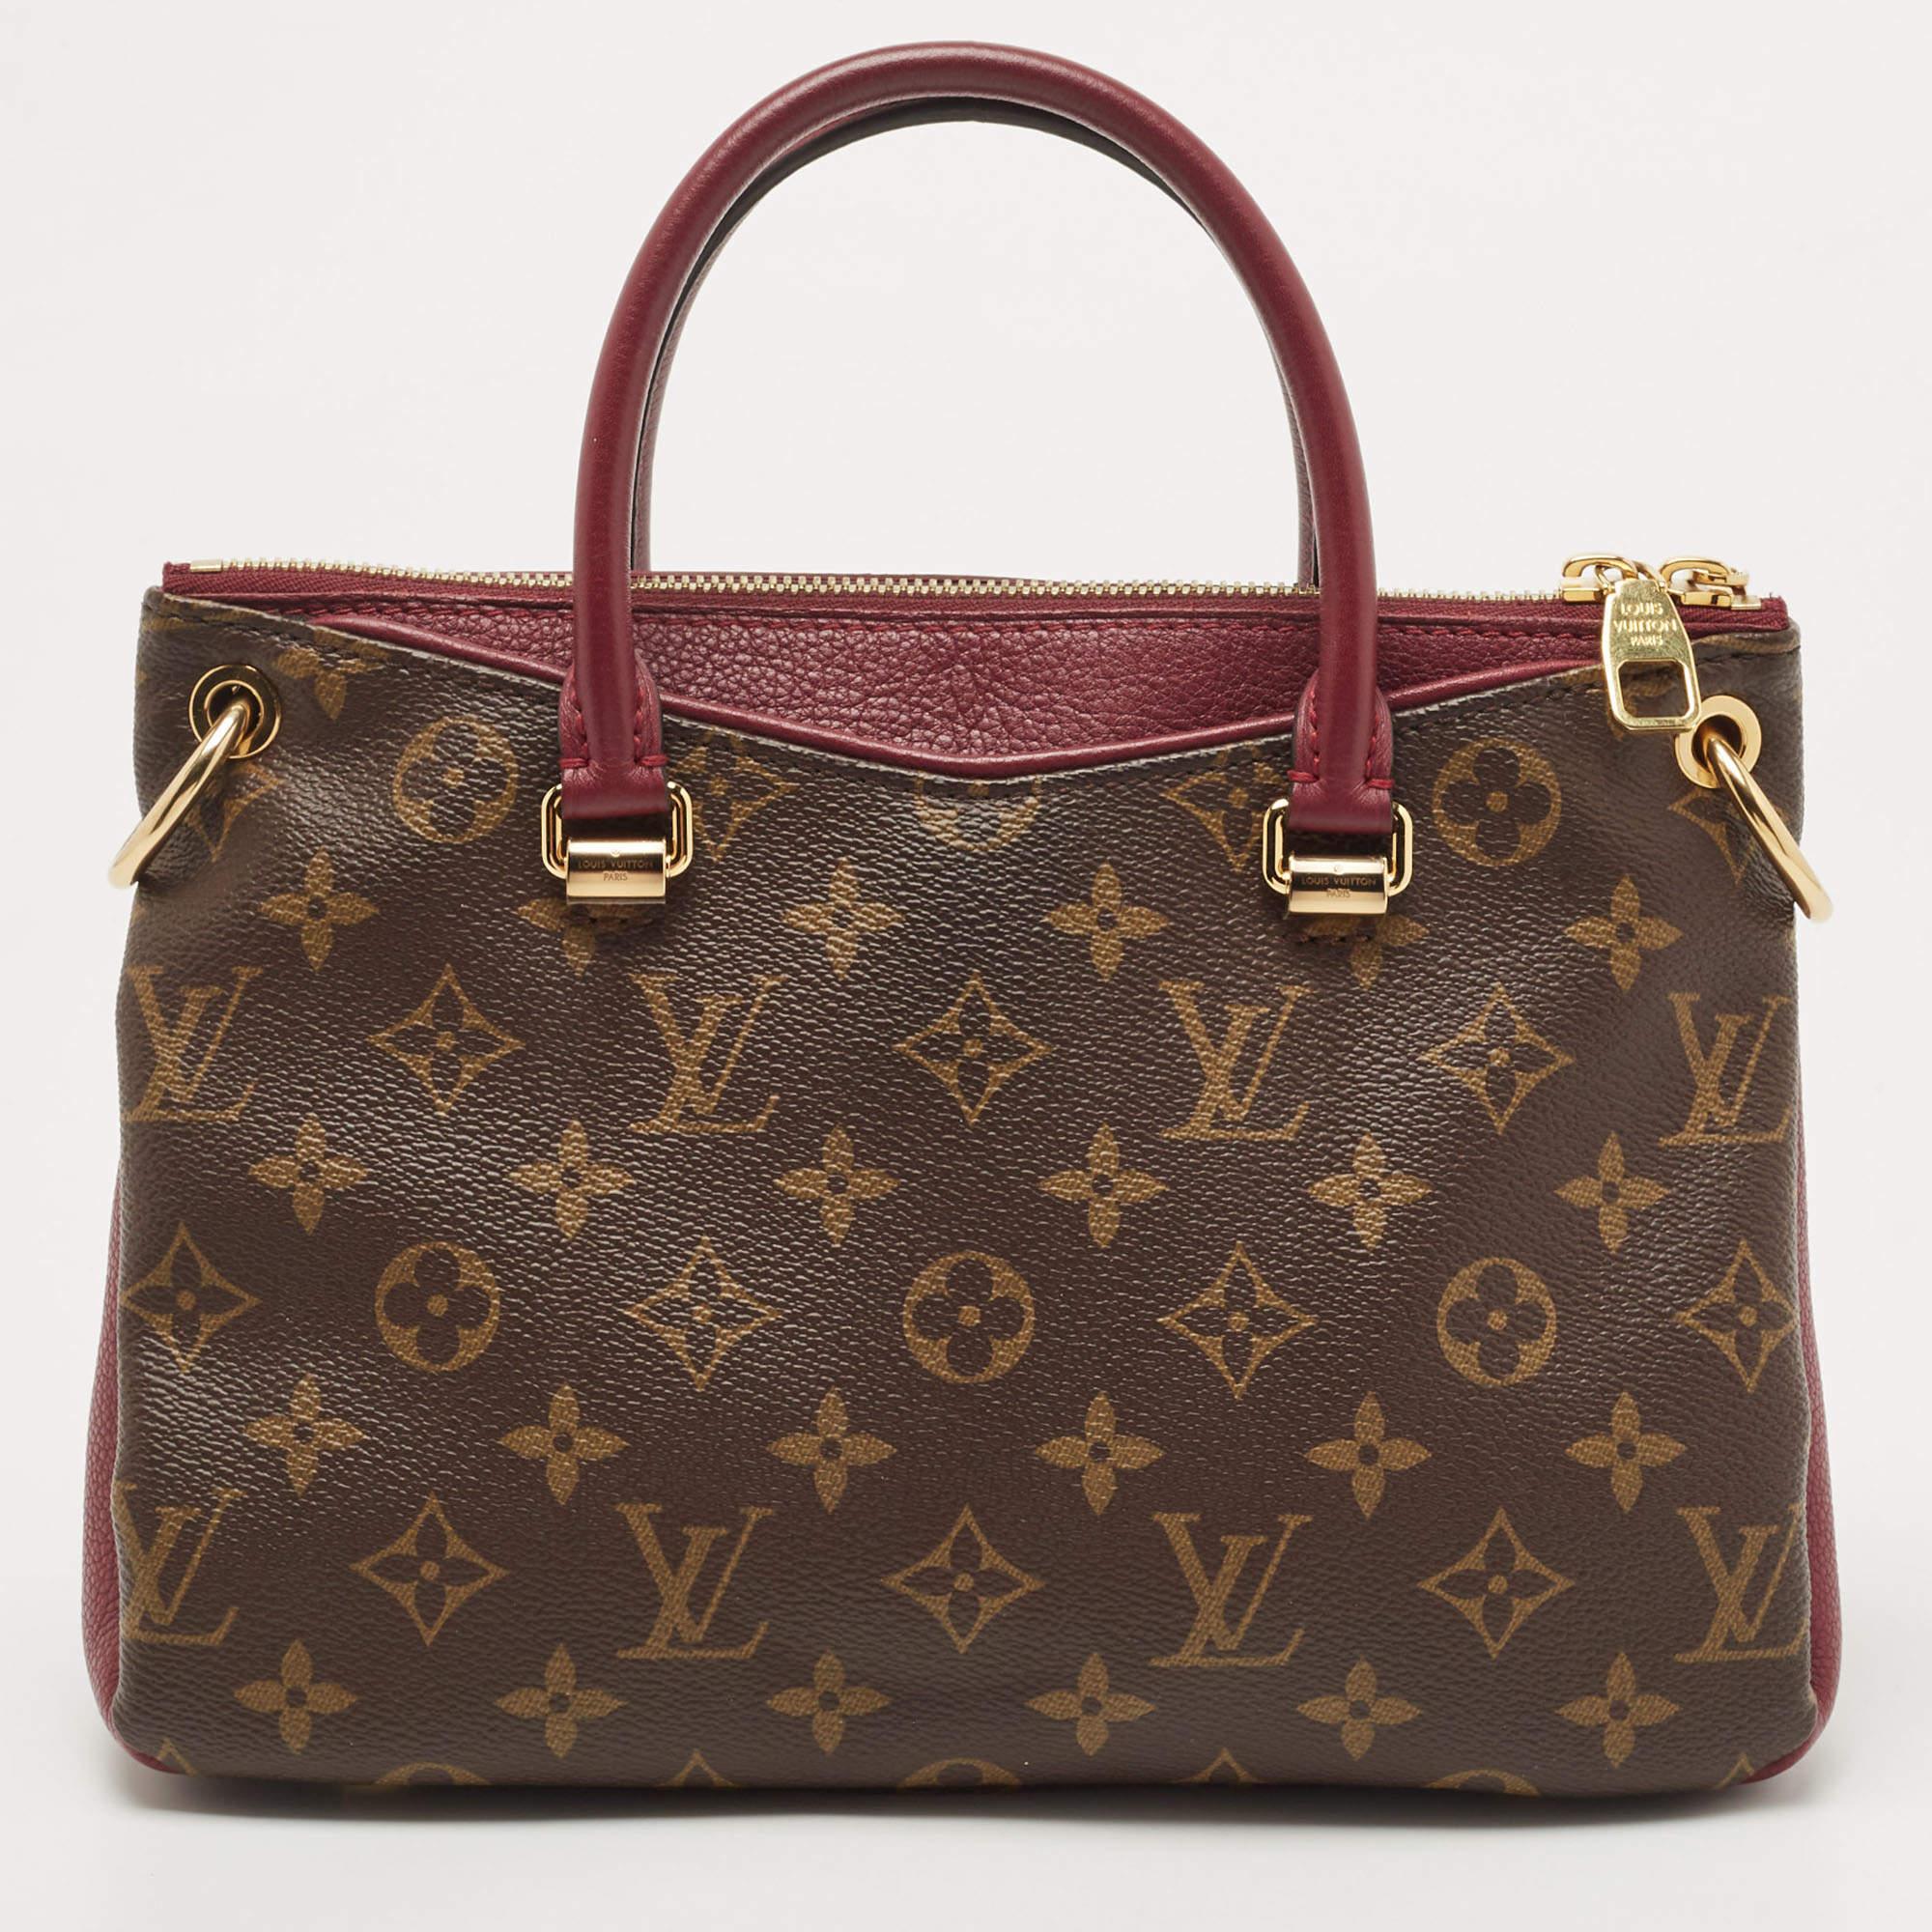 Louis Vuitton's handbags are popular owing to their high style and functionality. This Pallas bag, like all the other handbags, is durable and stylish. Crafted from their signature Aurore Monogram canvas, the bag comes with two rolled top handles